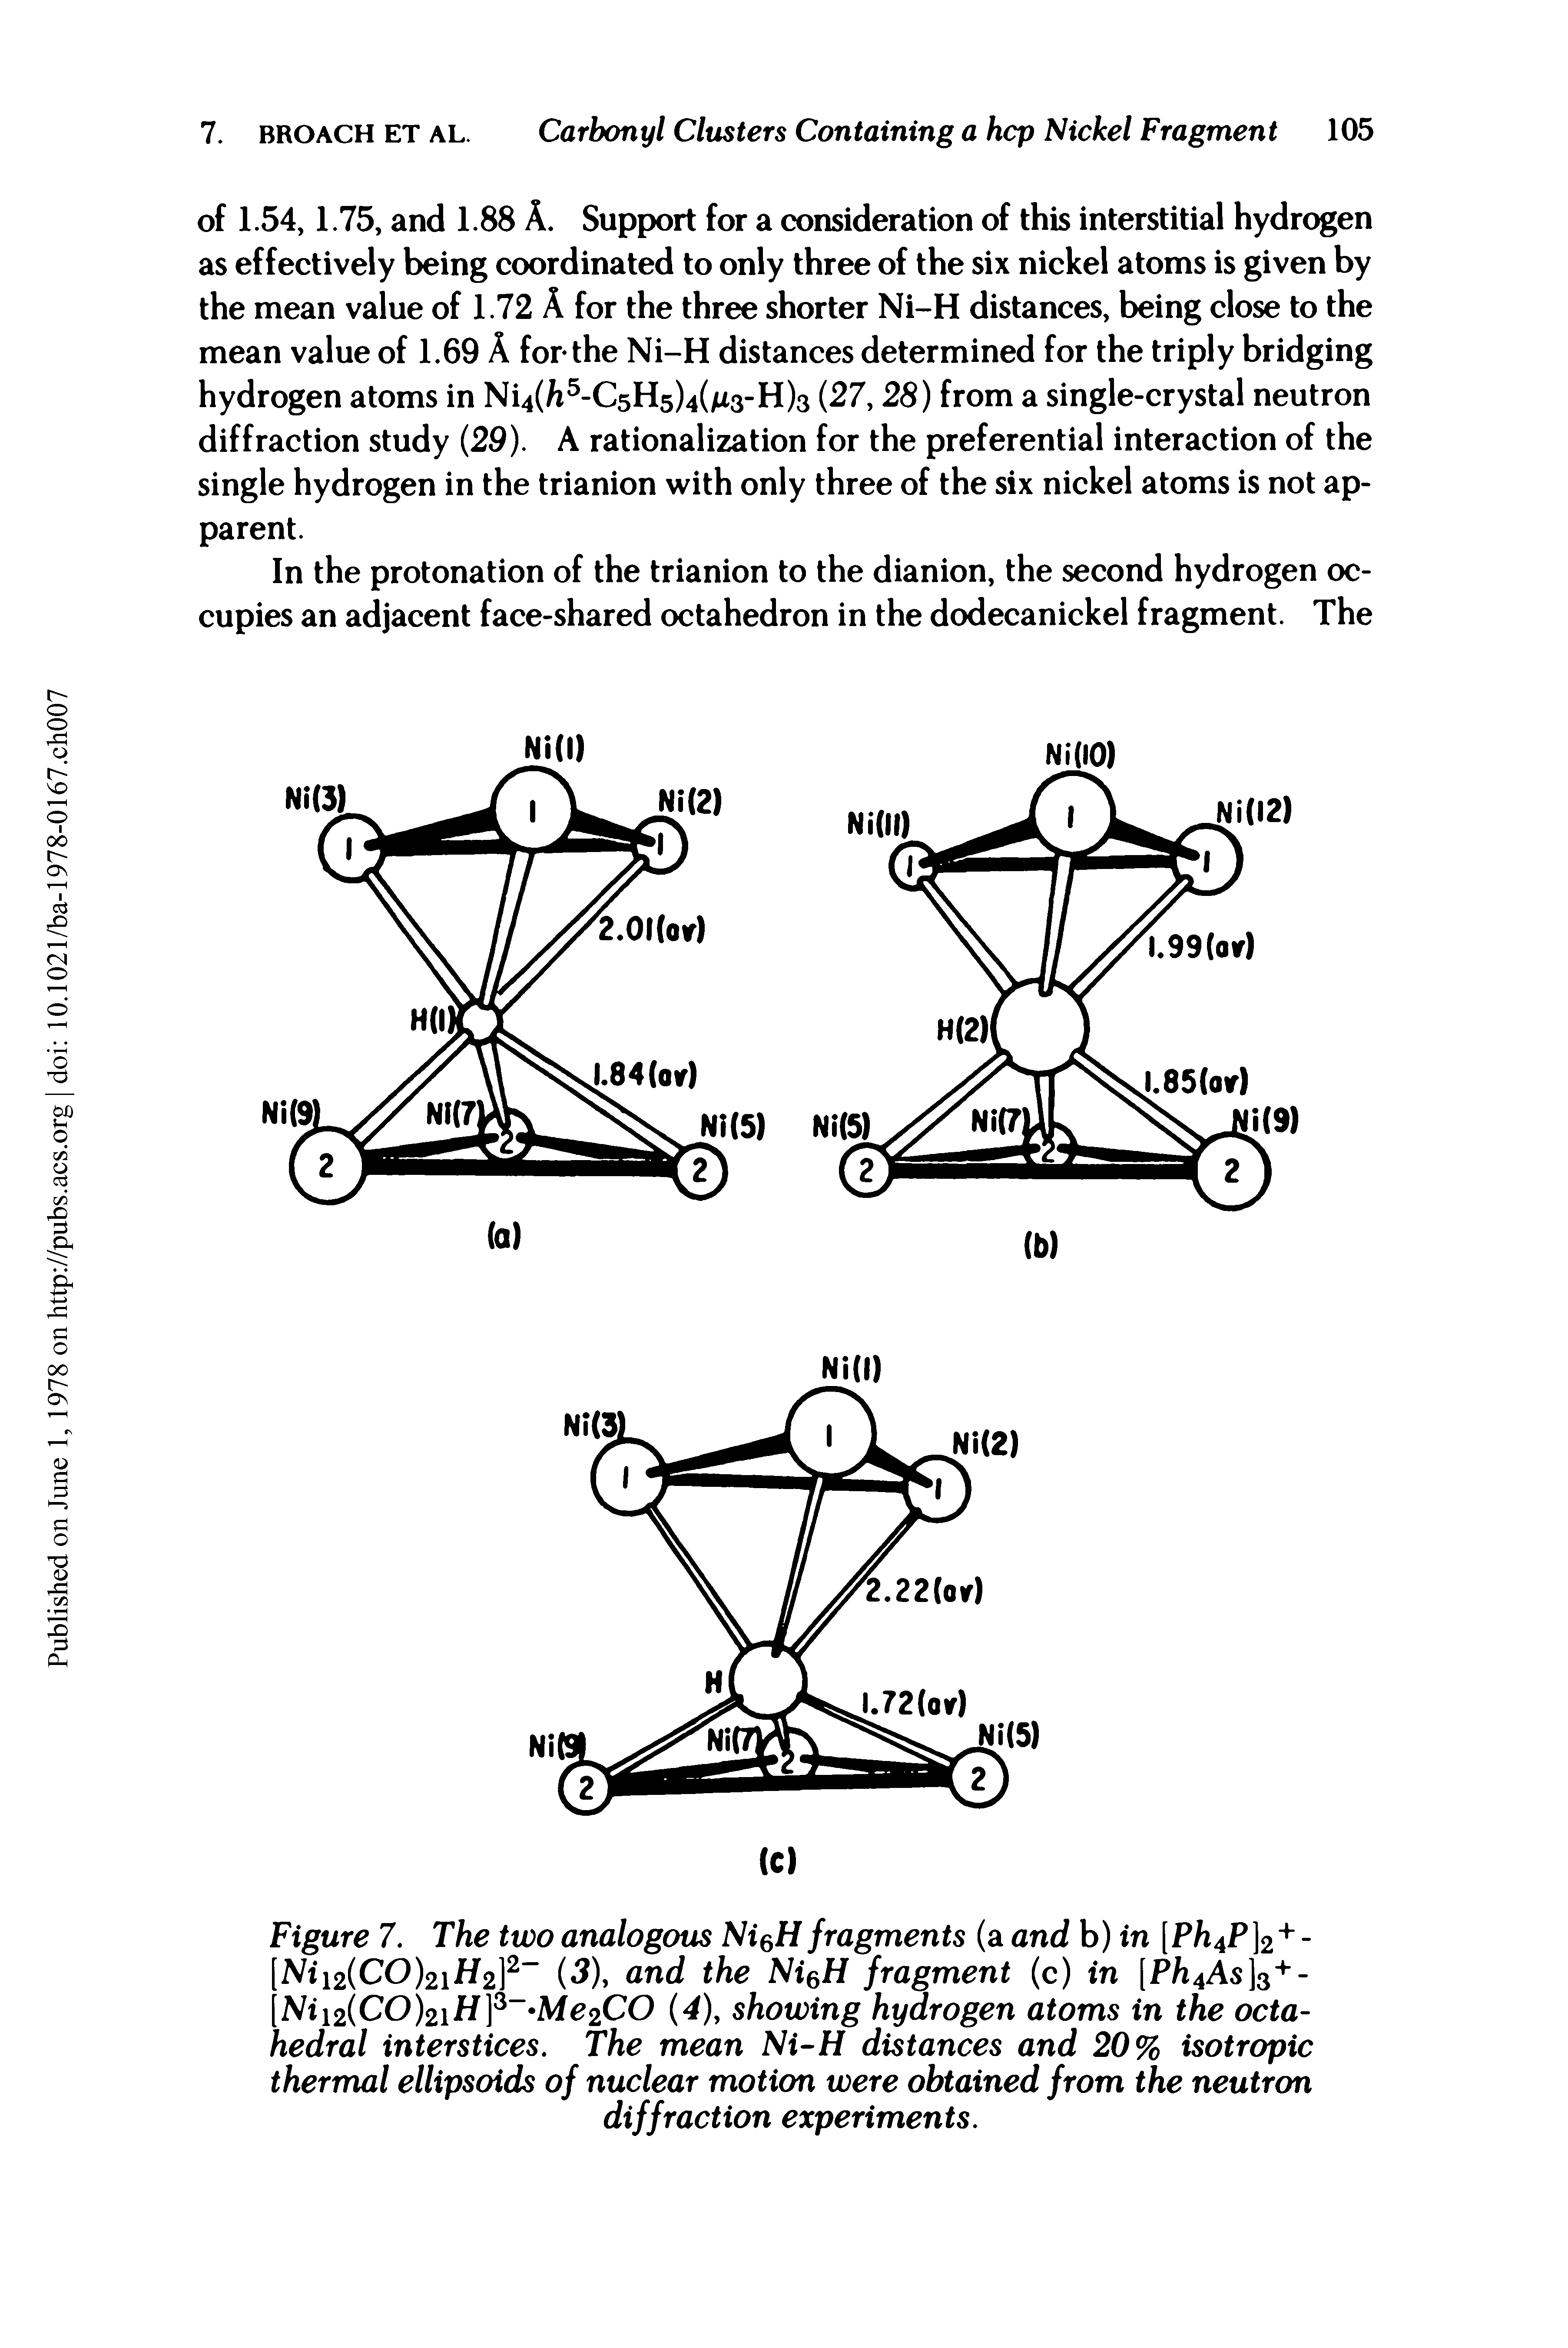 Figure 7. The two analogous Ni H fragments (a and b) in [P/i4P]2+-[Ni 2(CO)2 H2]2 (3), and the Ni H fragment (c) in [Ph4As]3+-[Nii2(CO)2itf]3-.Me2CO (4), showing hydrogen atoms in the octahedral interstices. The mean Ni-H distances and 20% isotropic thermal ellipsoids of nuclear motion were obtained from the neutron diffraction experiments.